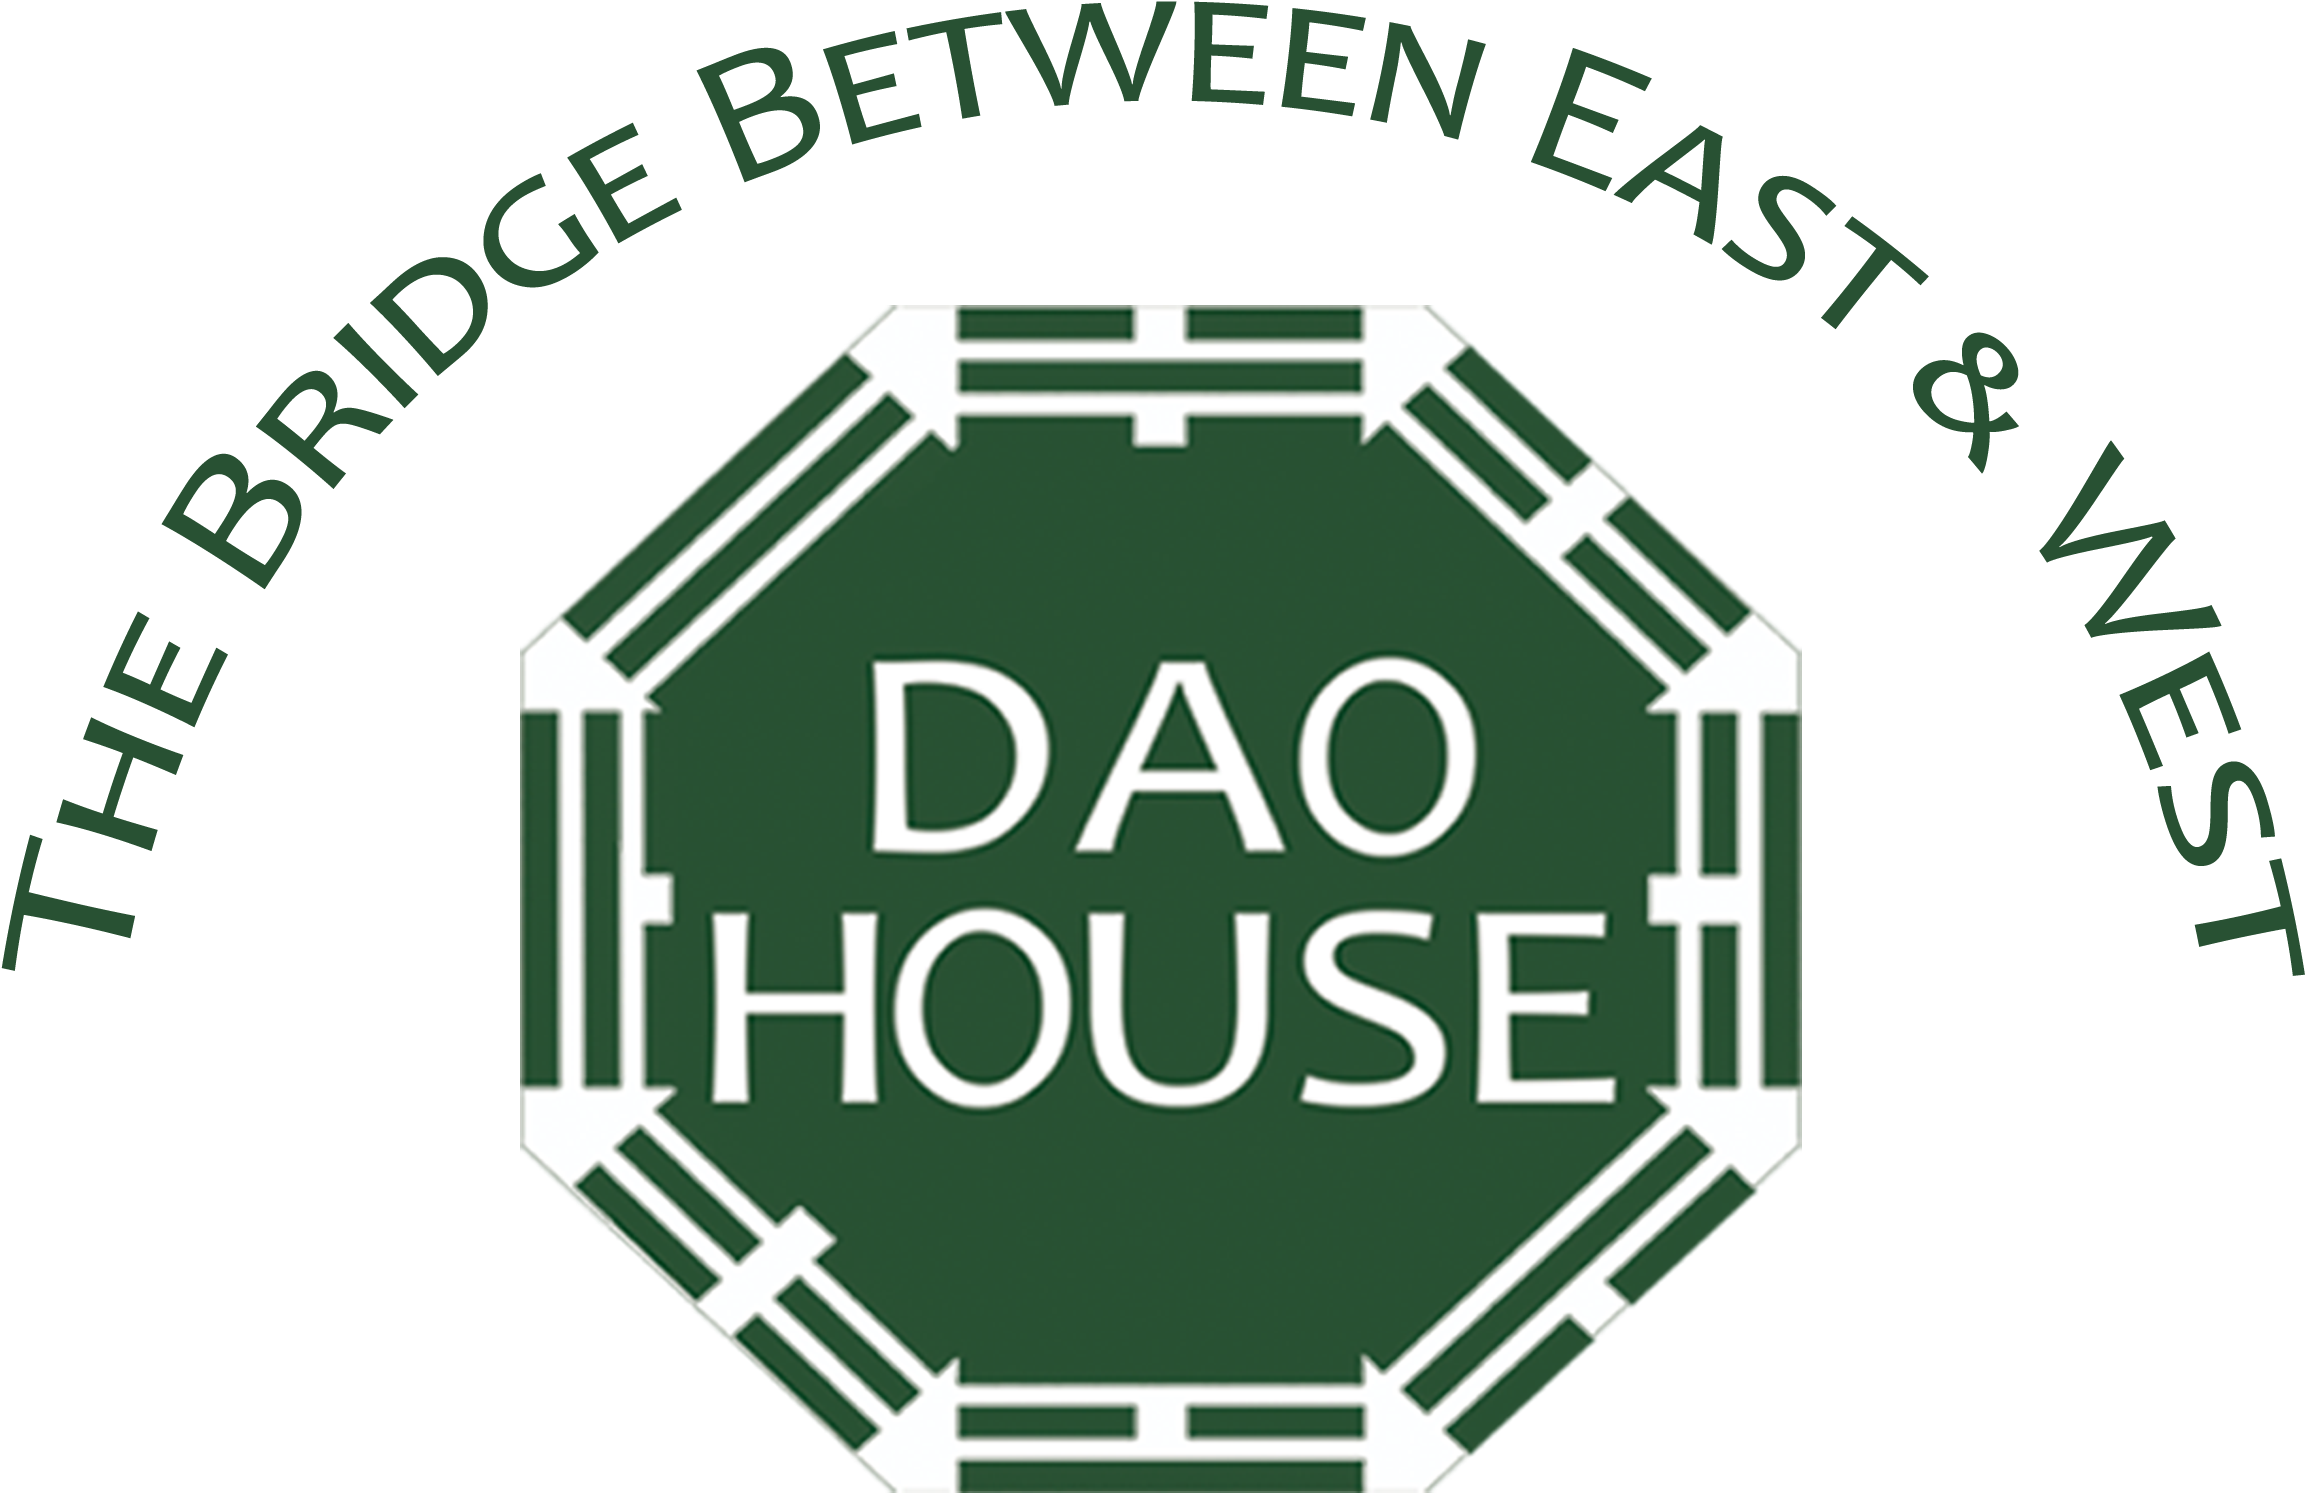 Dao House The Bridge Between East And West Return To - Dao House (2371x1851)